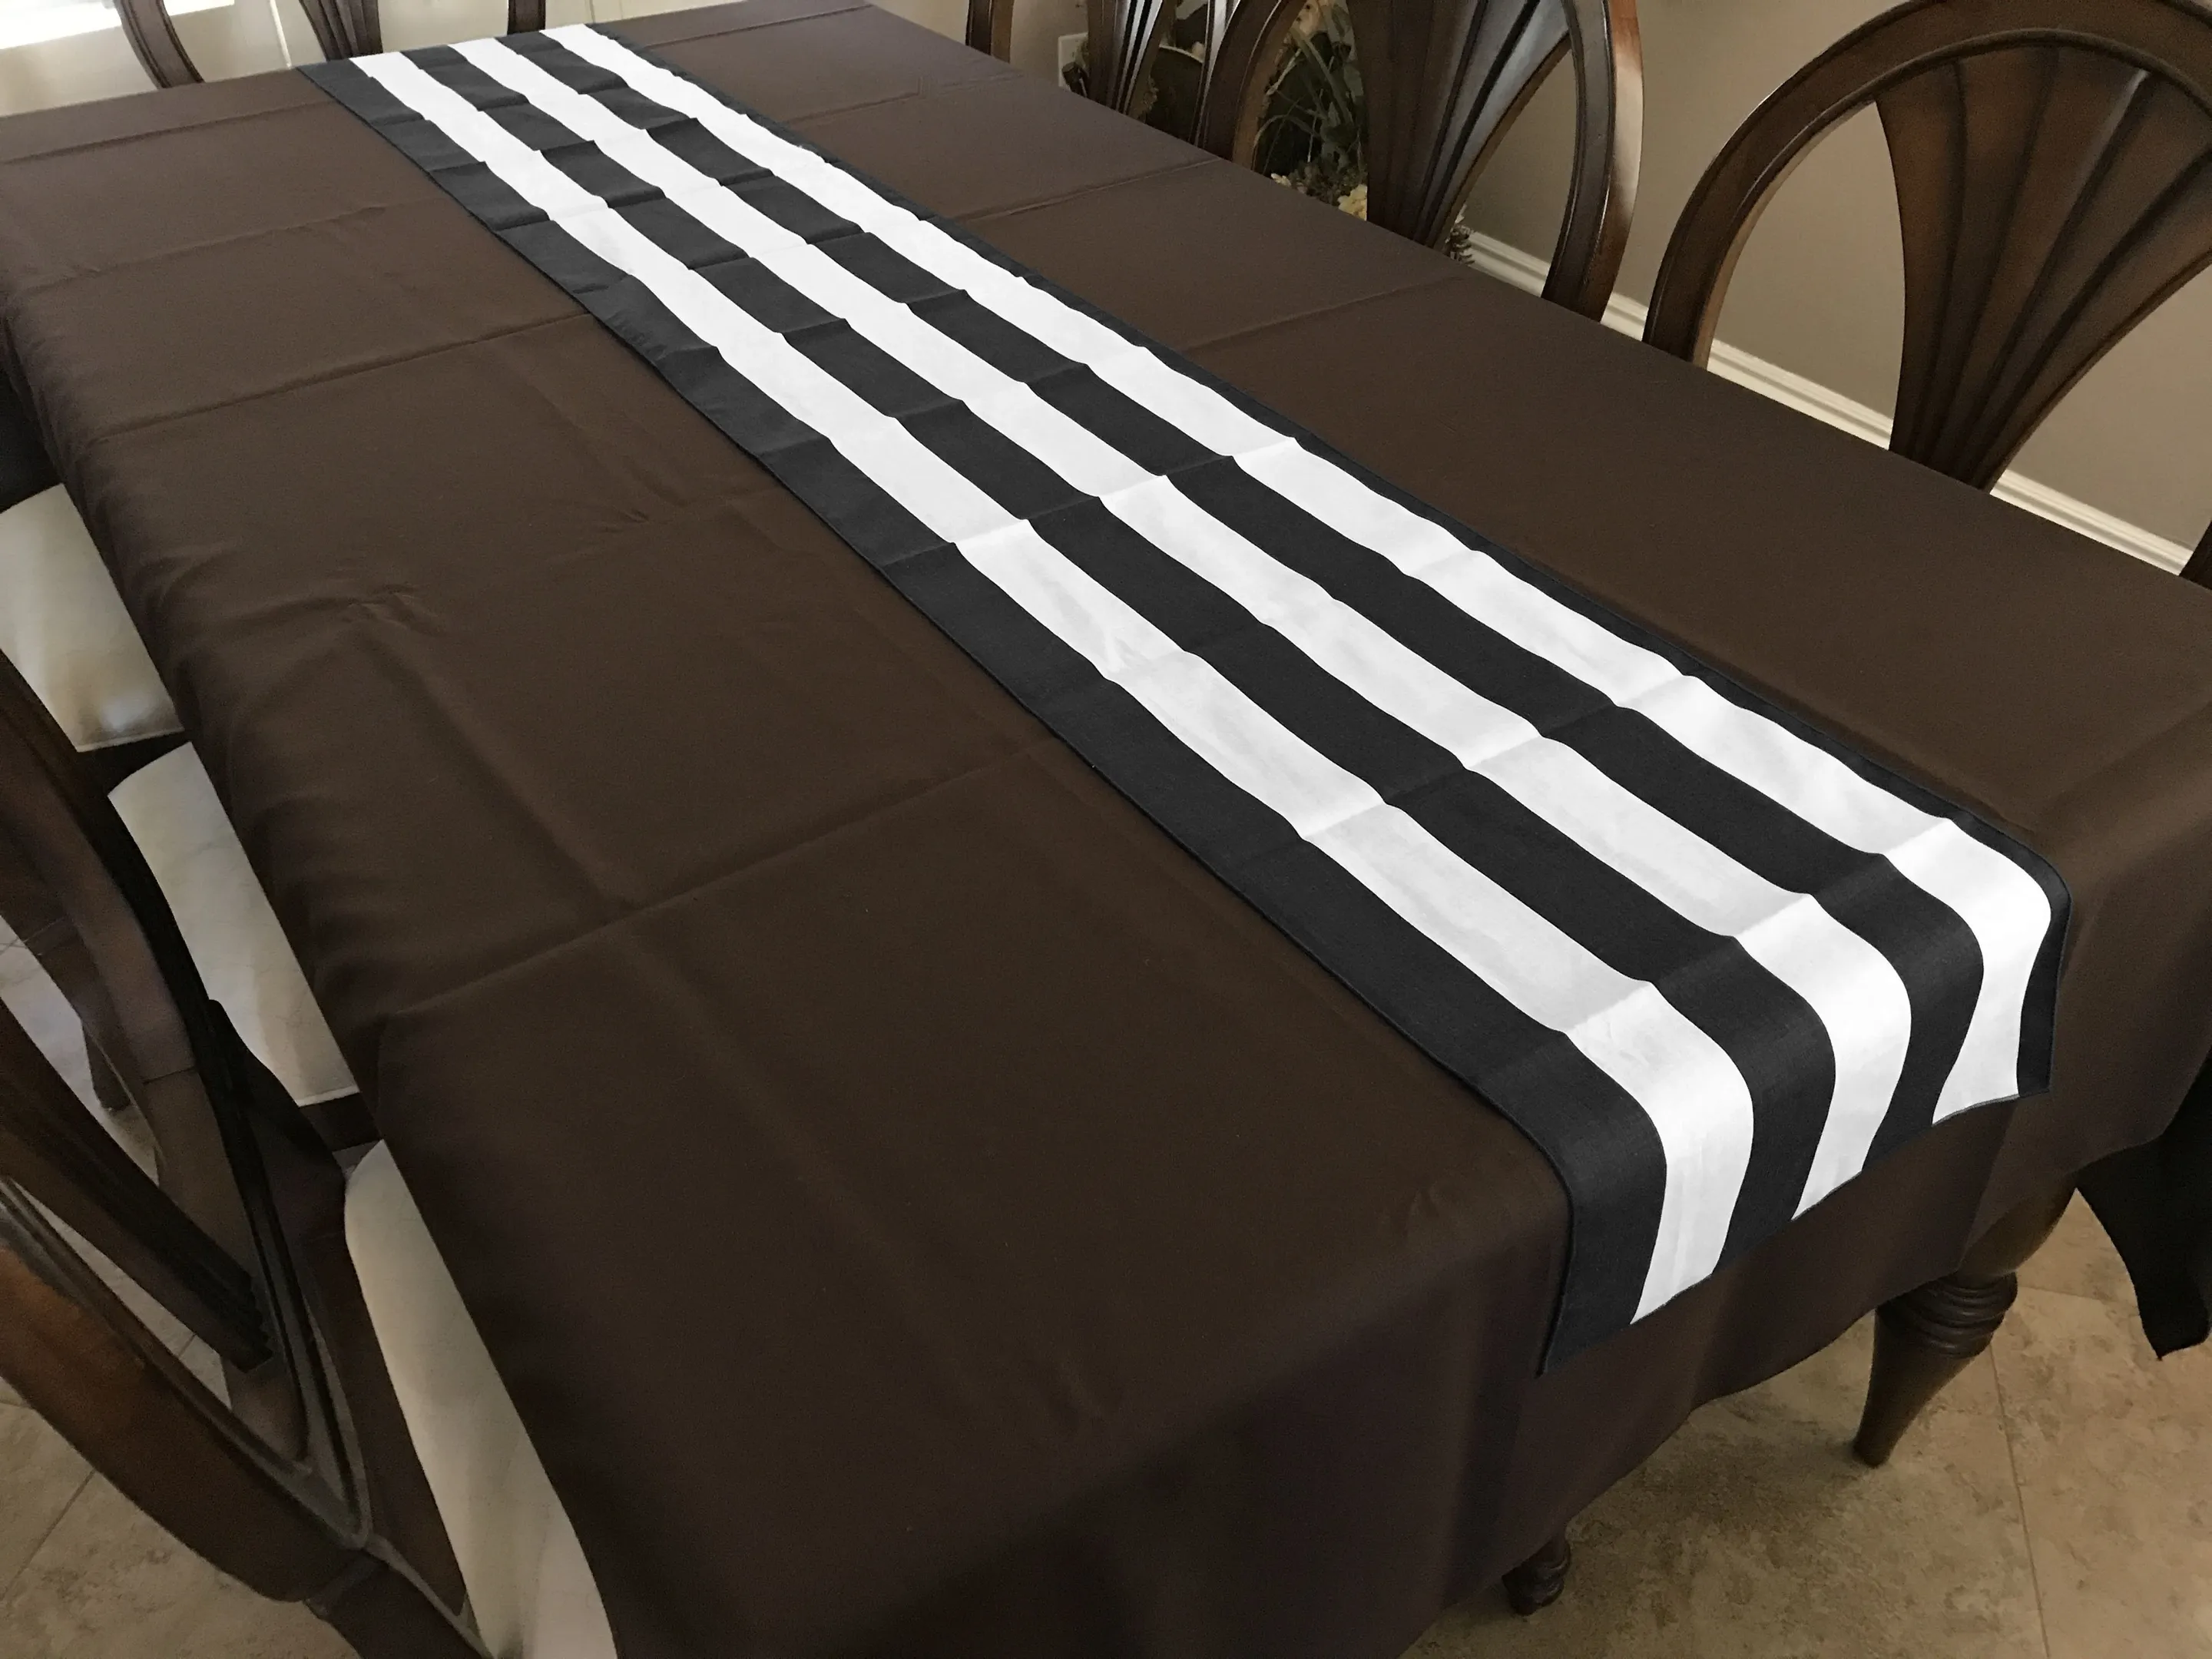 printed table runner background stripes black and white 8291 scaled